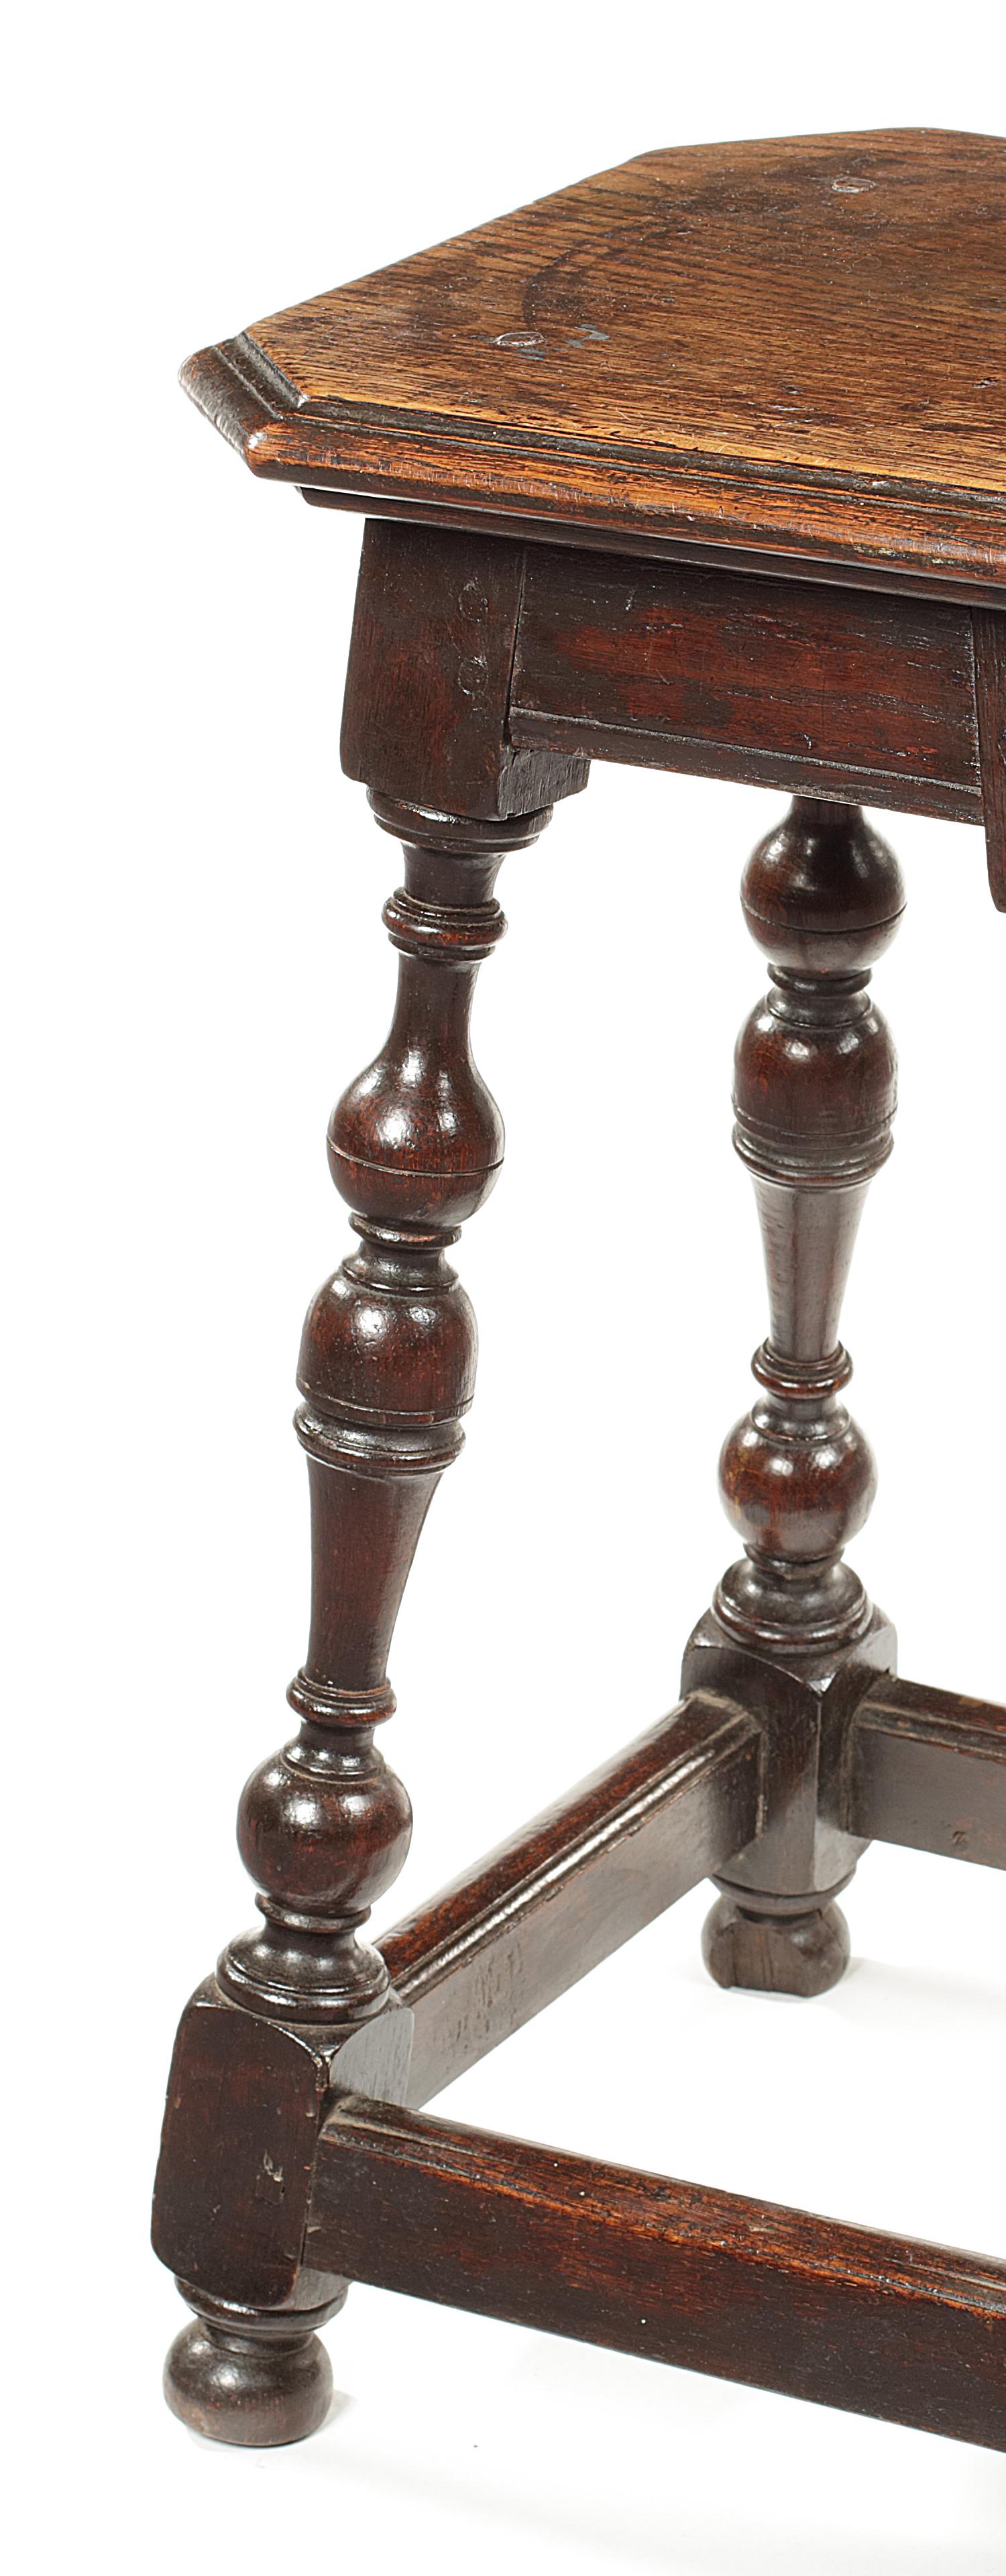 17th century and later oak joined stool
Of unusual design, with canted square top and tall baluster legs joined by moulded stretchers, 32cm square, 55.5cm high.